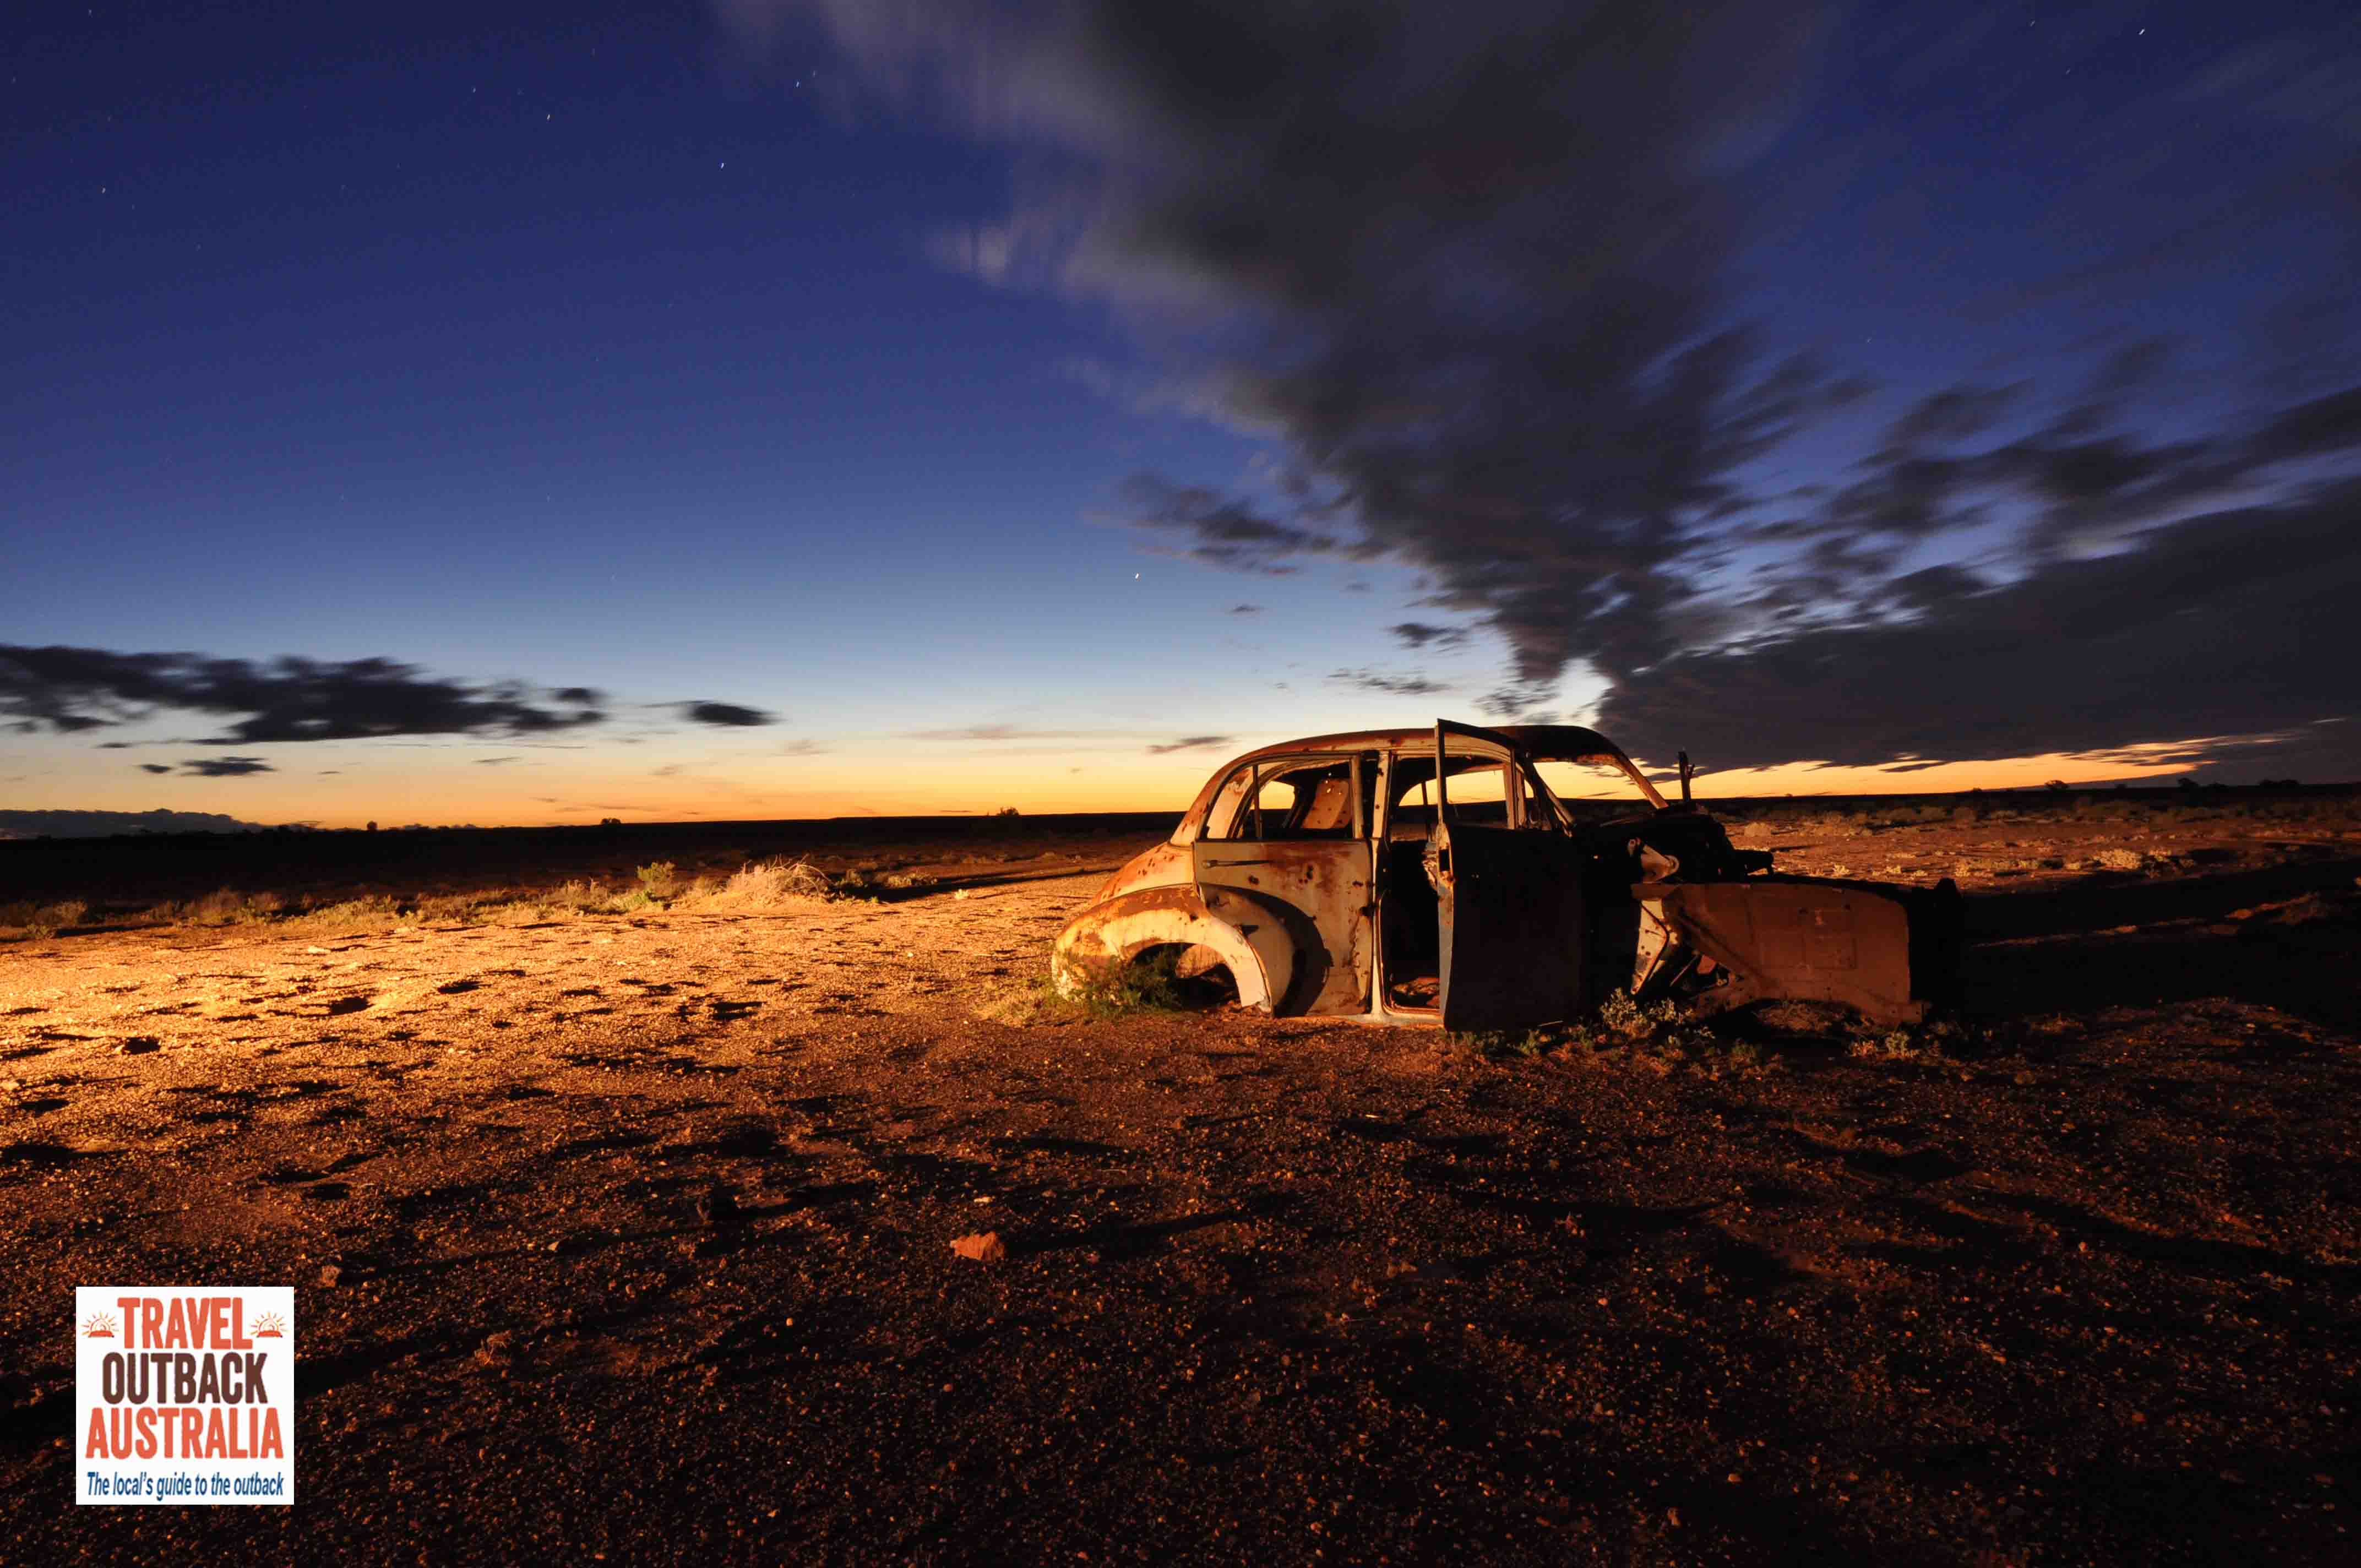 21 Fabulous Outback Sunsets (PHOTOS)